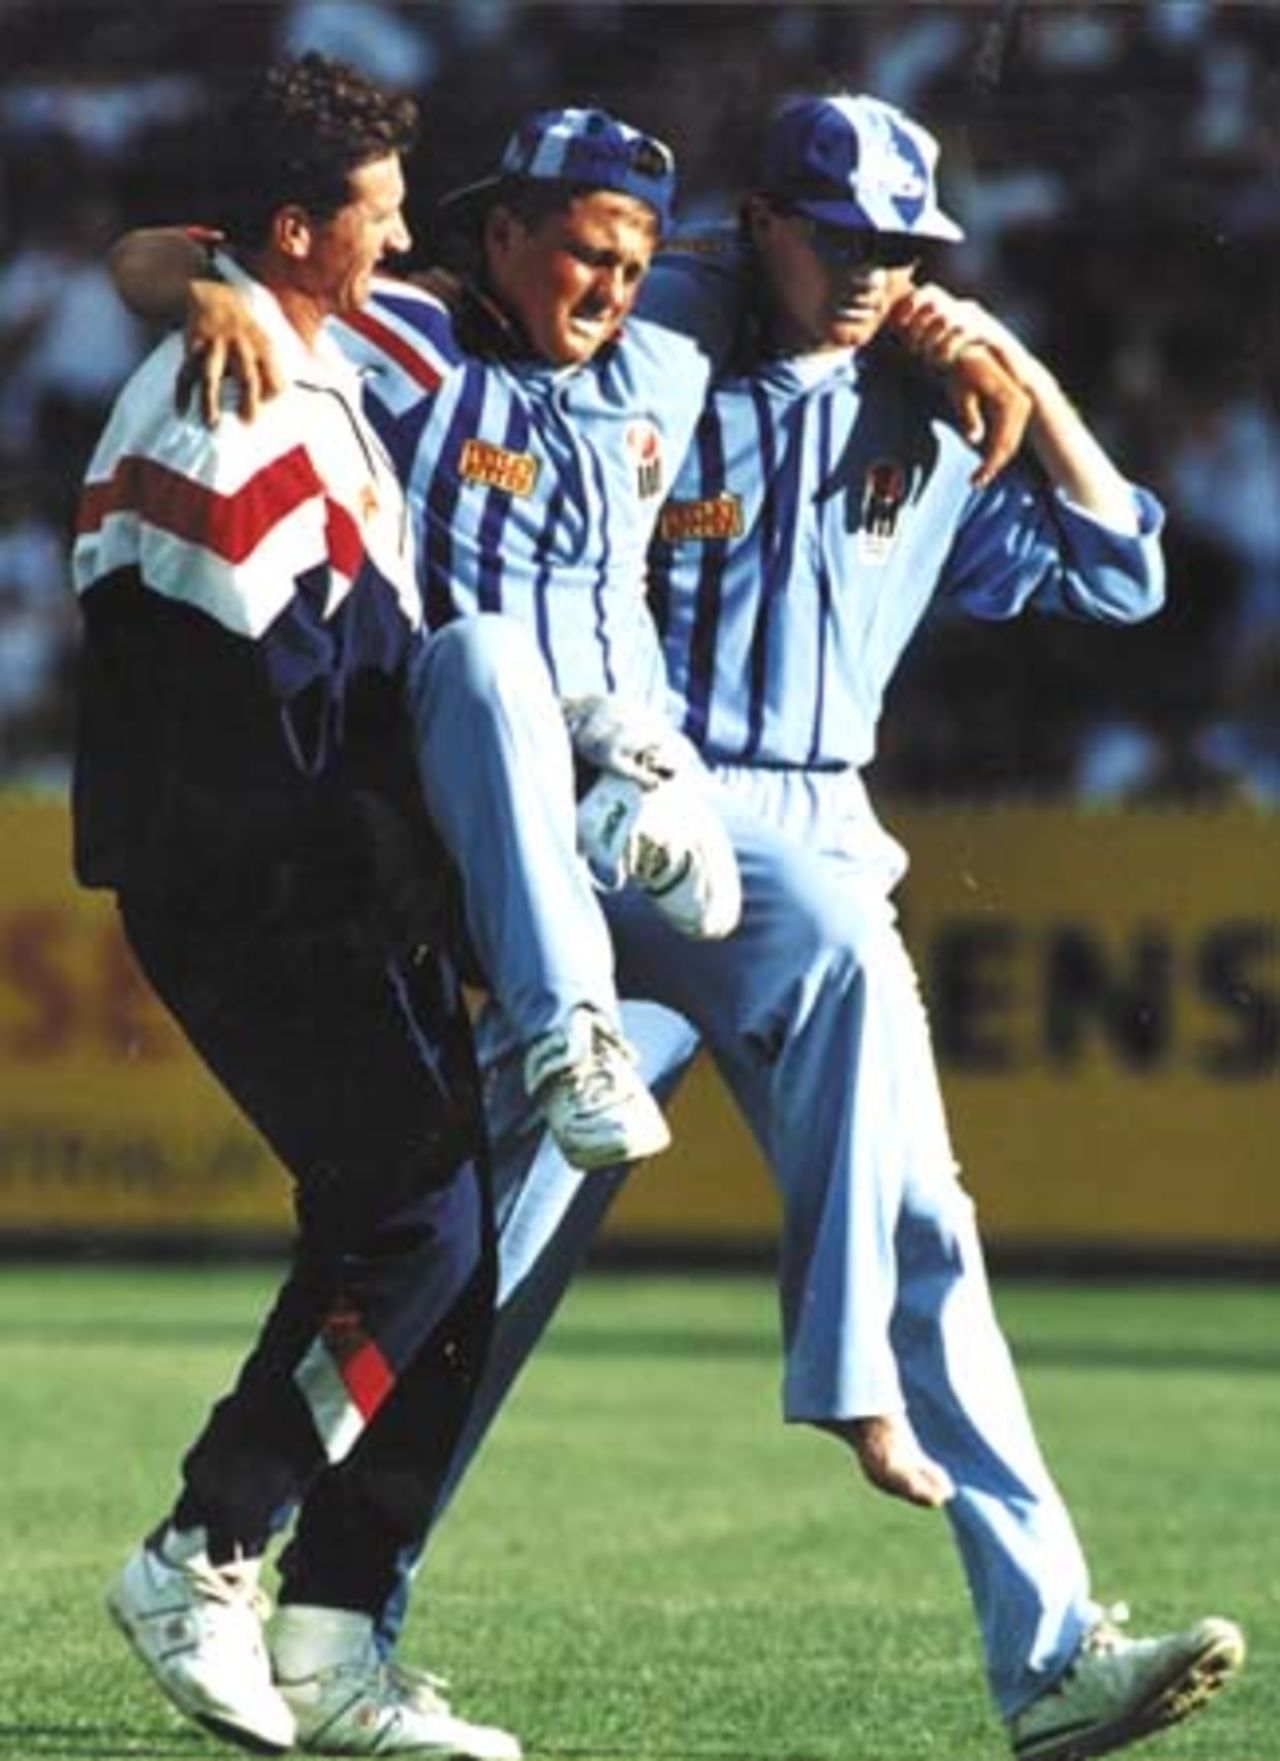 Shaun Udal is on hand to assist Darren Gough off the field in the One Day International at Melbourne in January 1995. Physio Dave Roberts is the other helper.